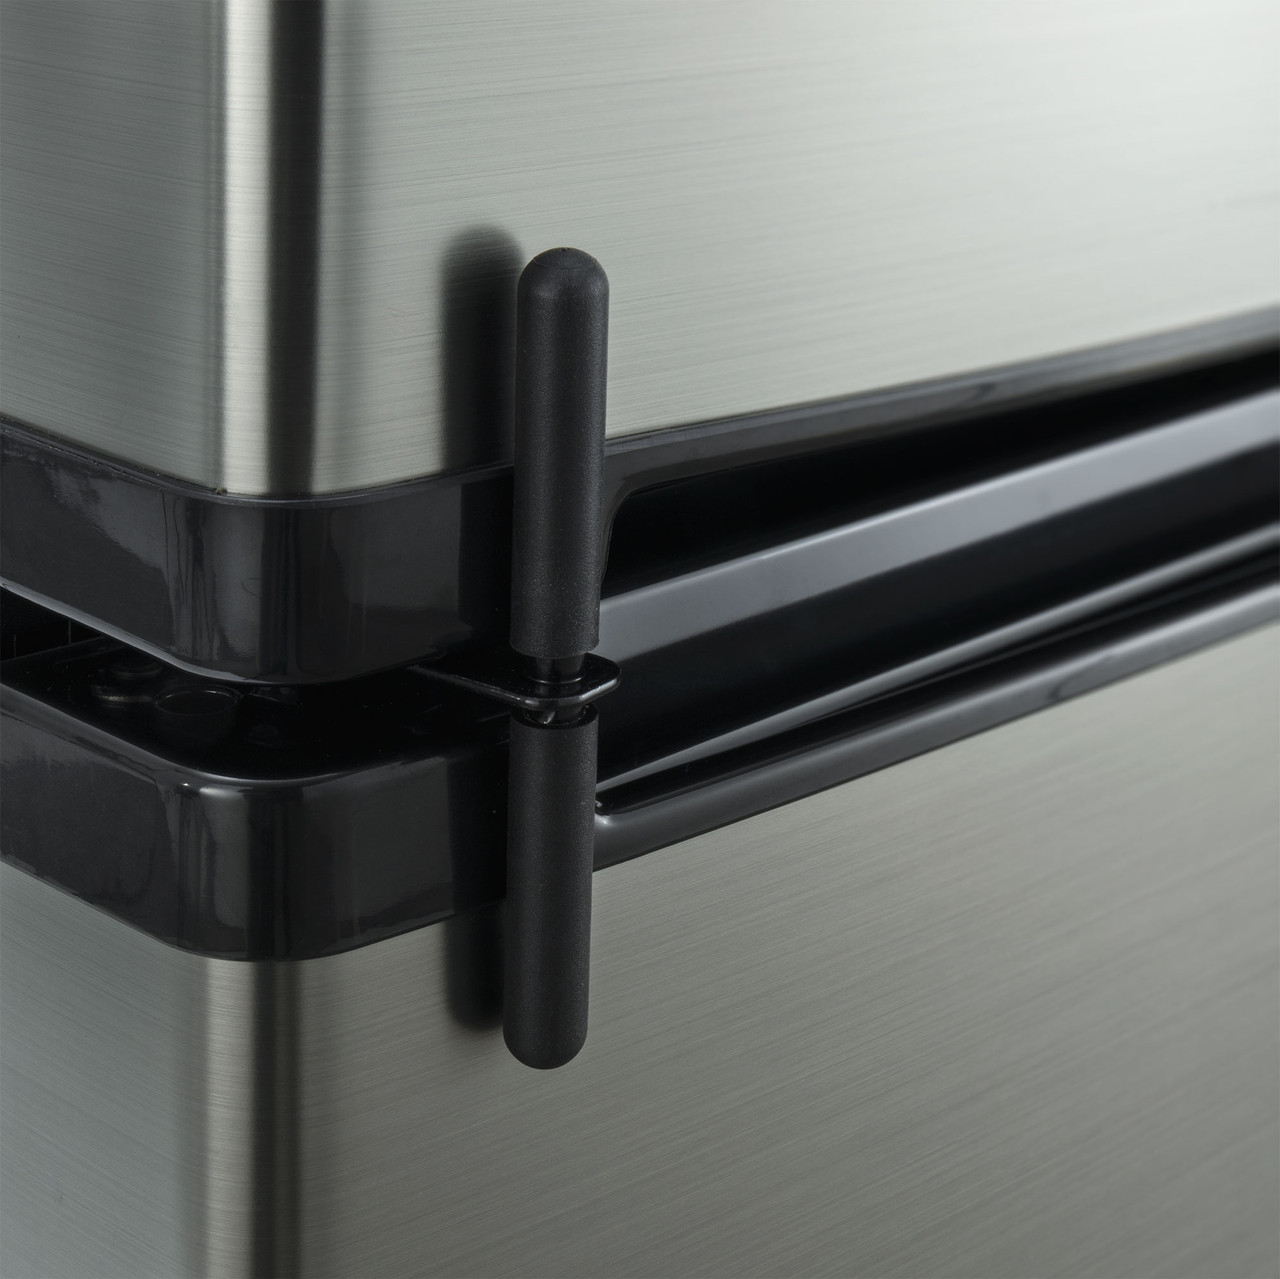 Refrigerator Latches, Safety for Seniors